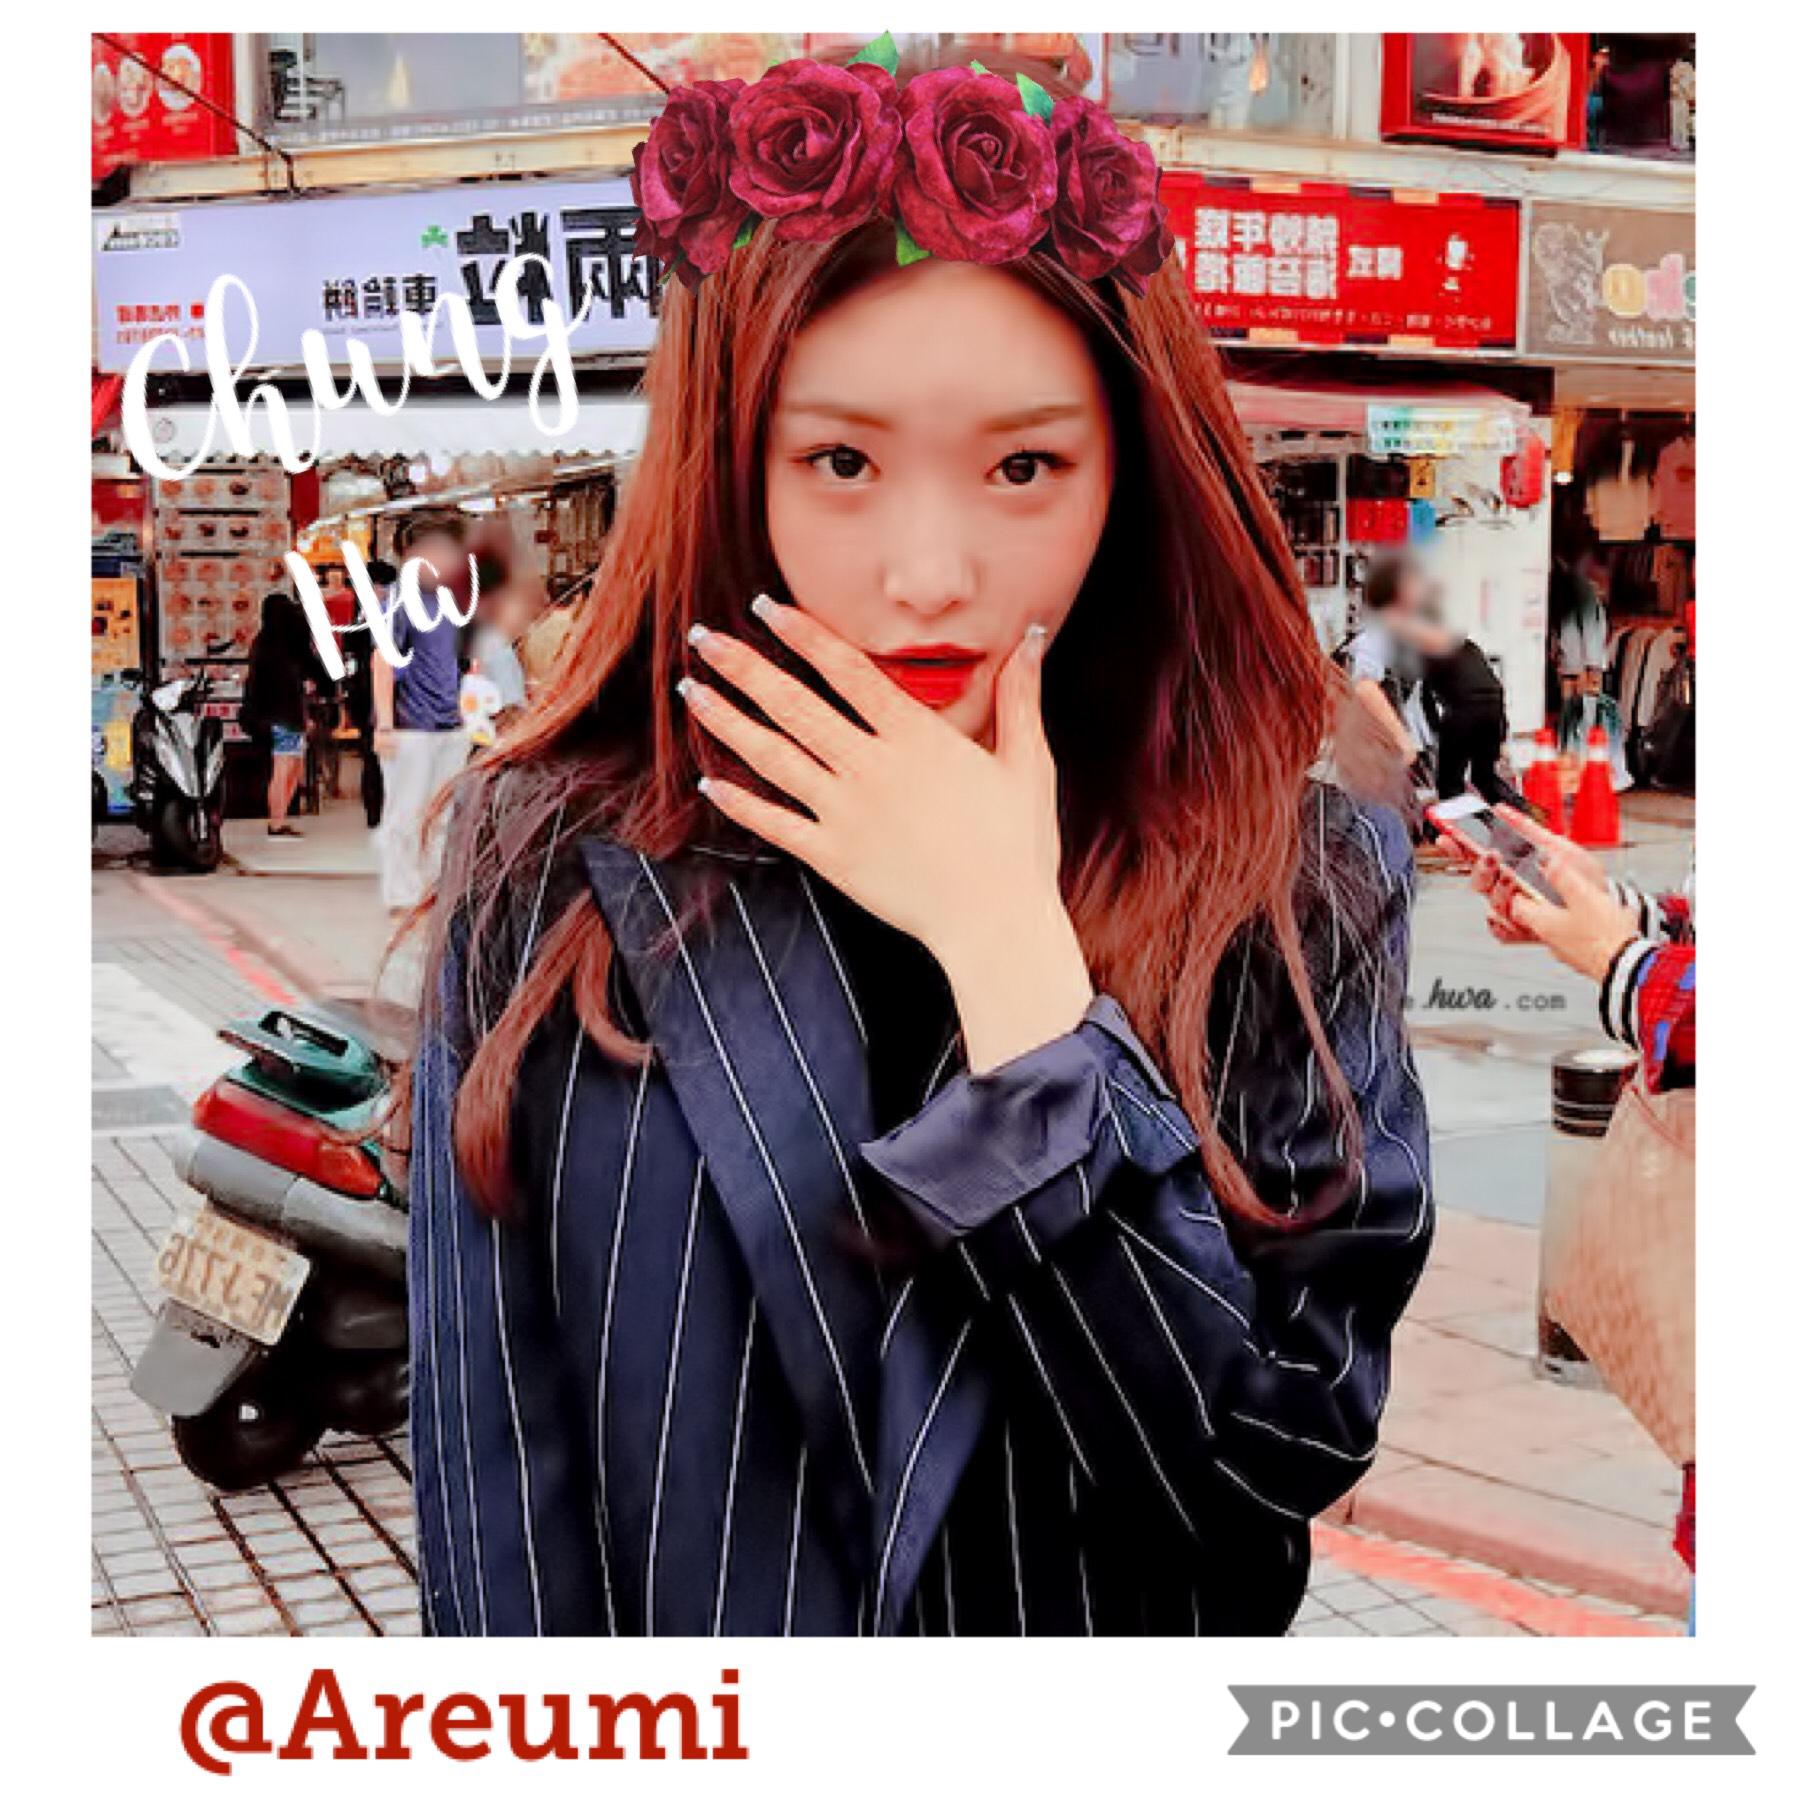 The Queen ! CHUNG HA ! If have any idol u want me to do please tell meee! Luv ya 🌹